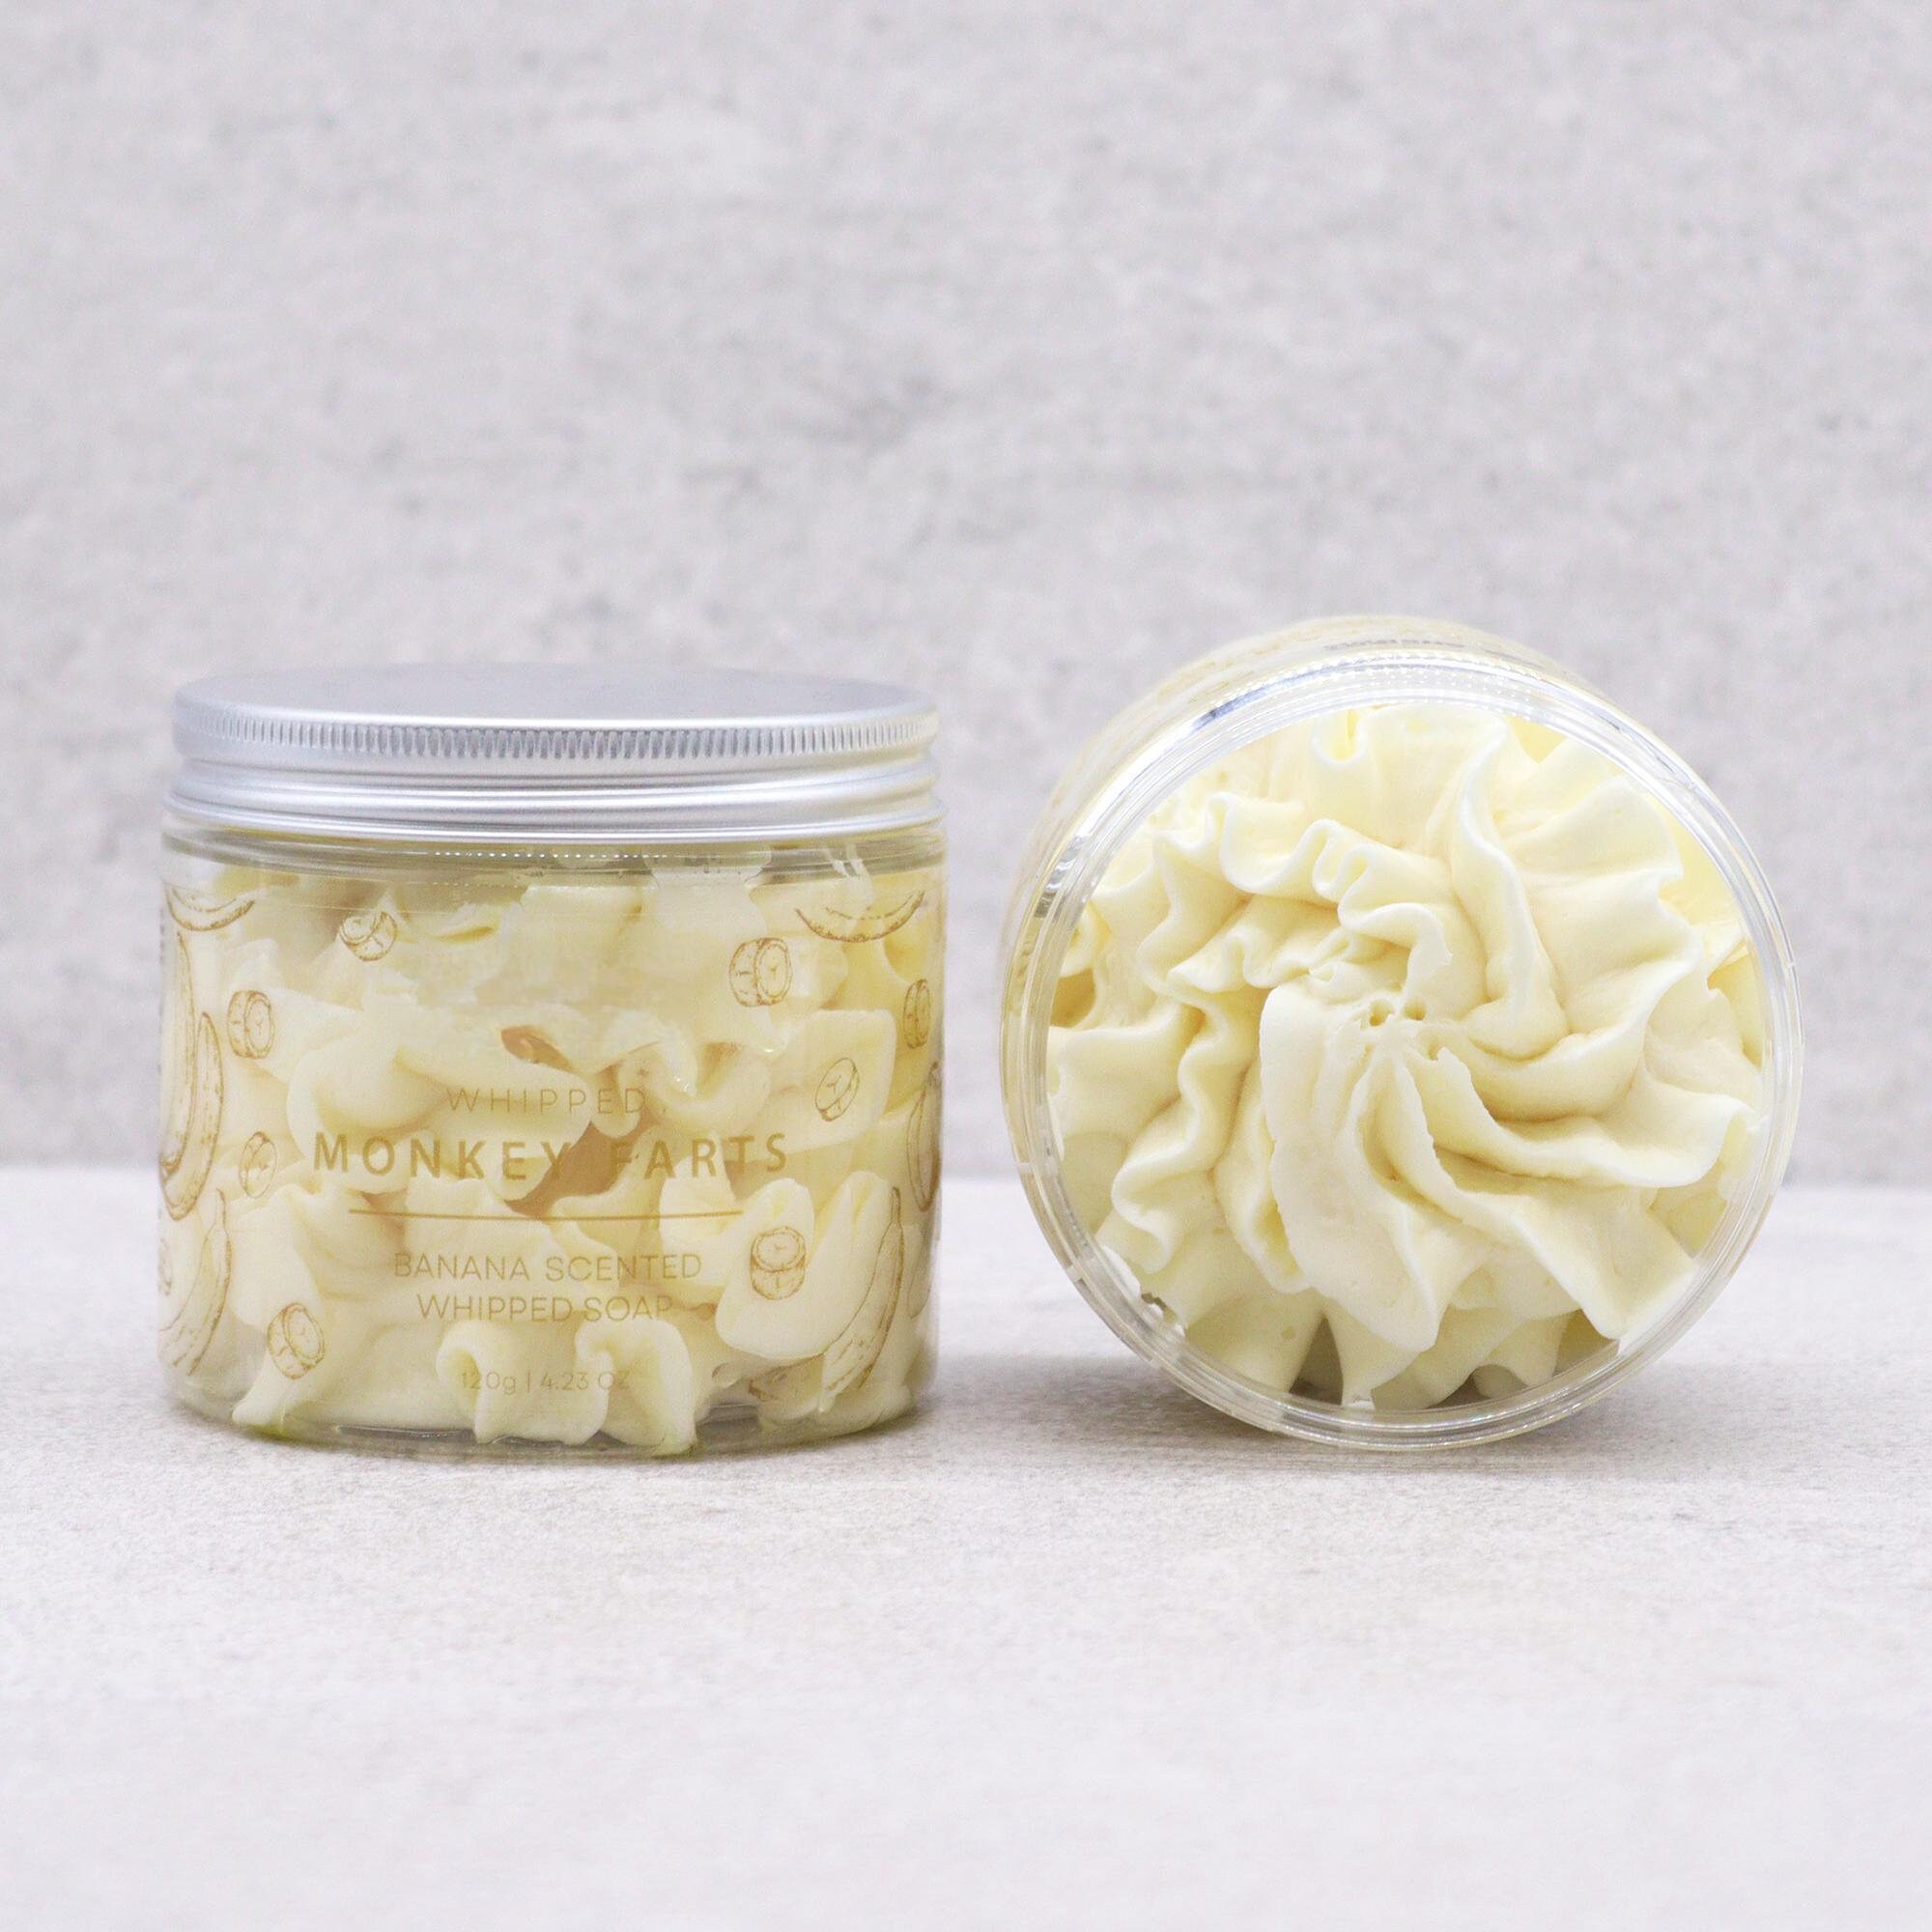 Circus Circus/ Fluffy Whipped Soap/ Cream Body Wash/ Peanut Butter & Banana  Scented With Elephant and Peanut Soap 